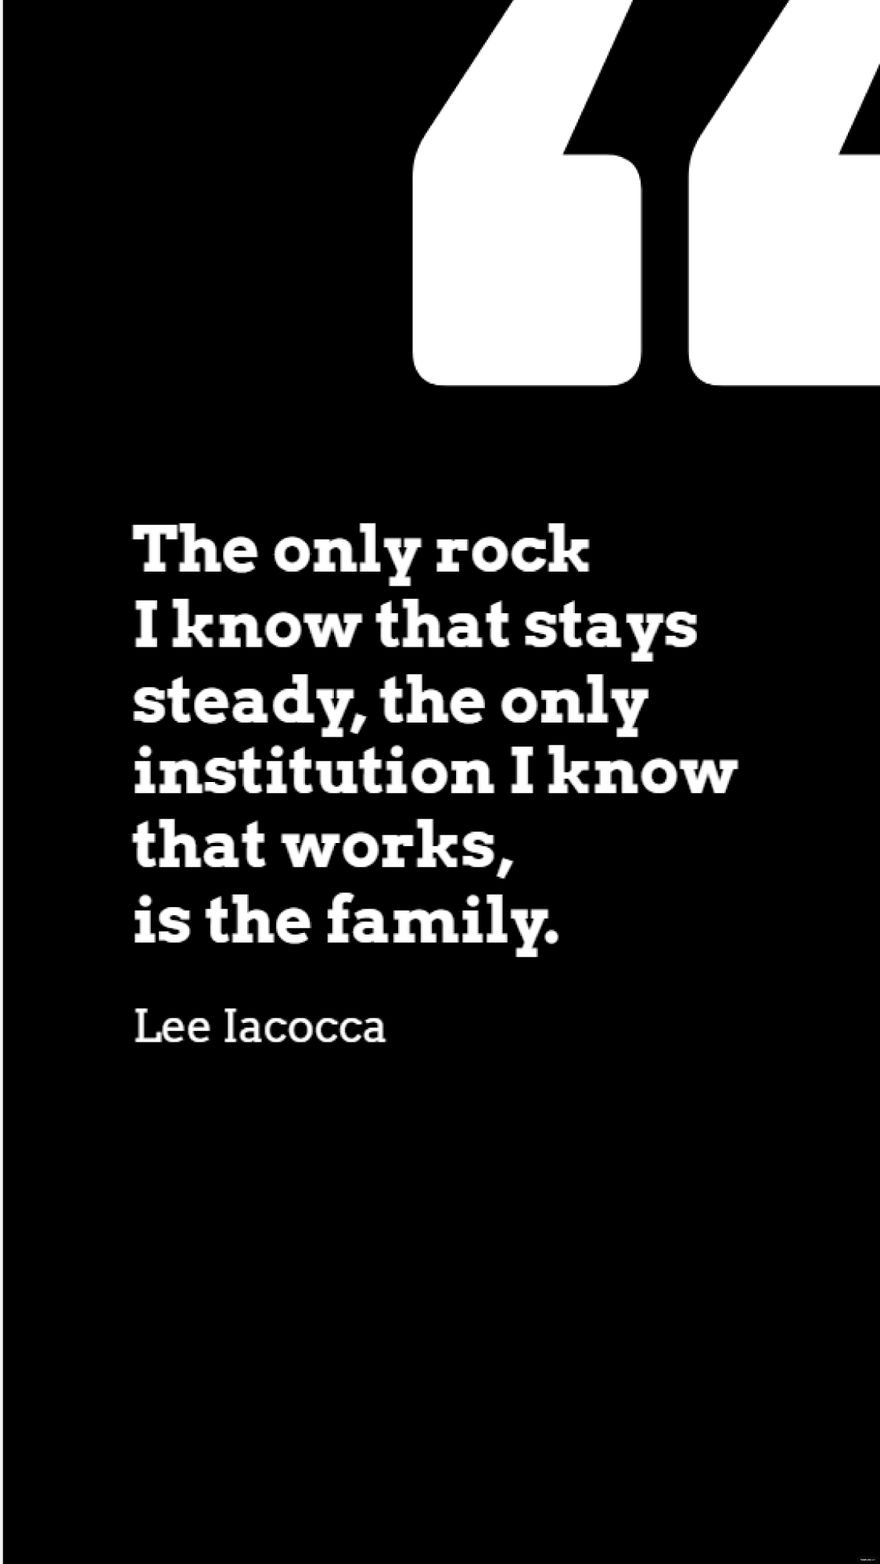 Free Lee Iacocca - The only rock I know that stays steady, the only institution I know that works, is the family. in JPG